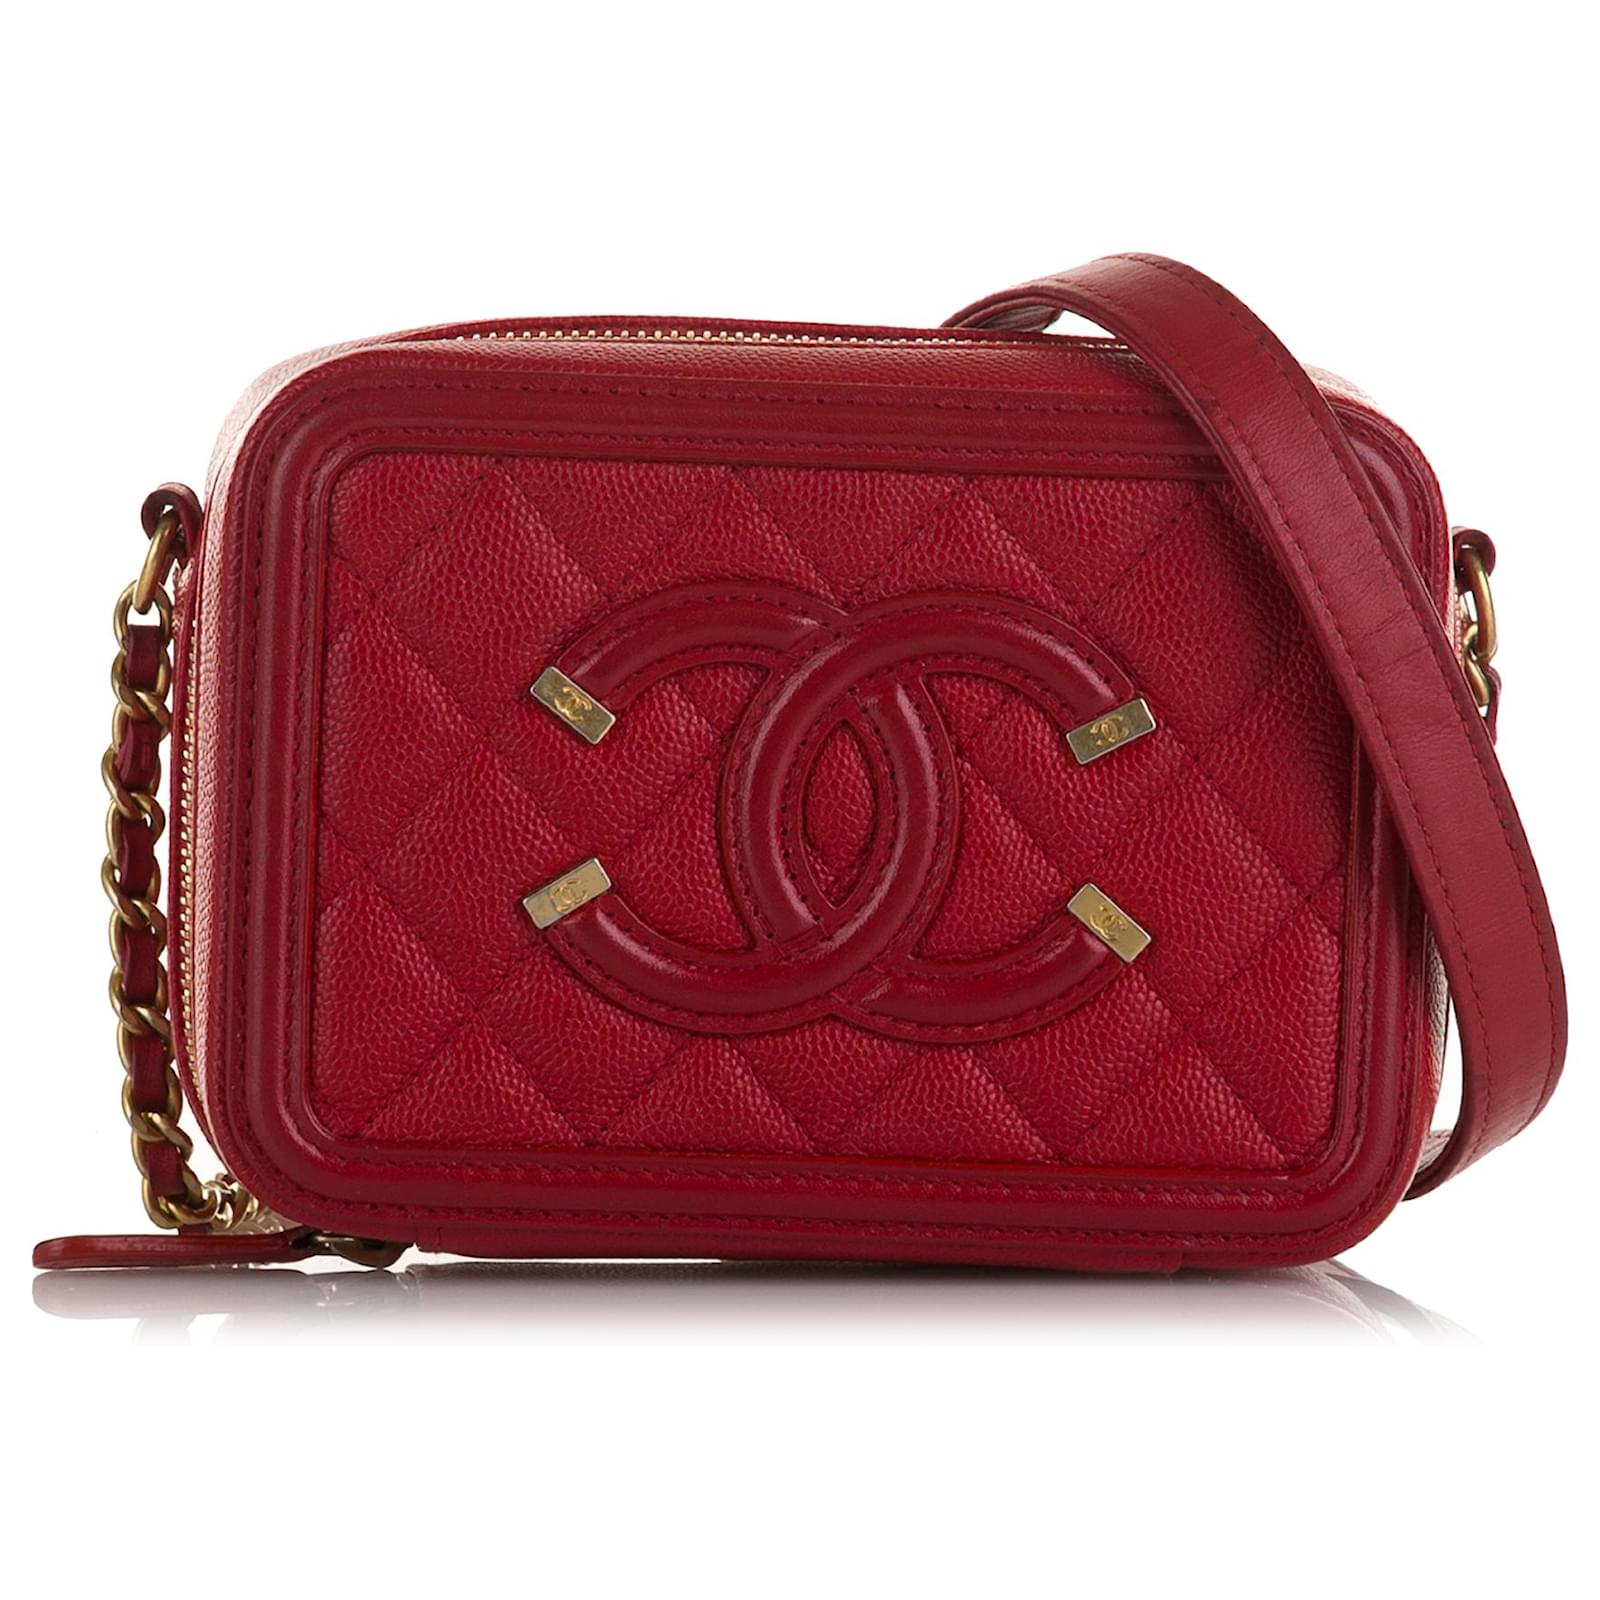 Chanel Red Quilted Caviar Leather Filigree Vanity Case Bag